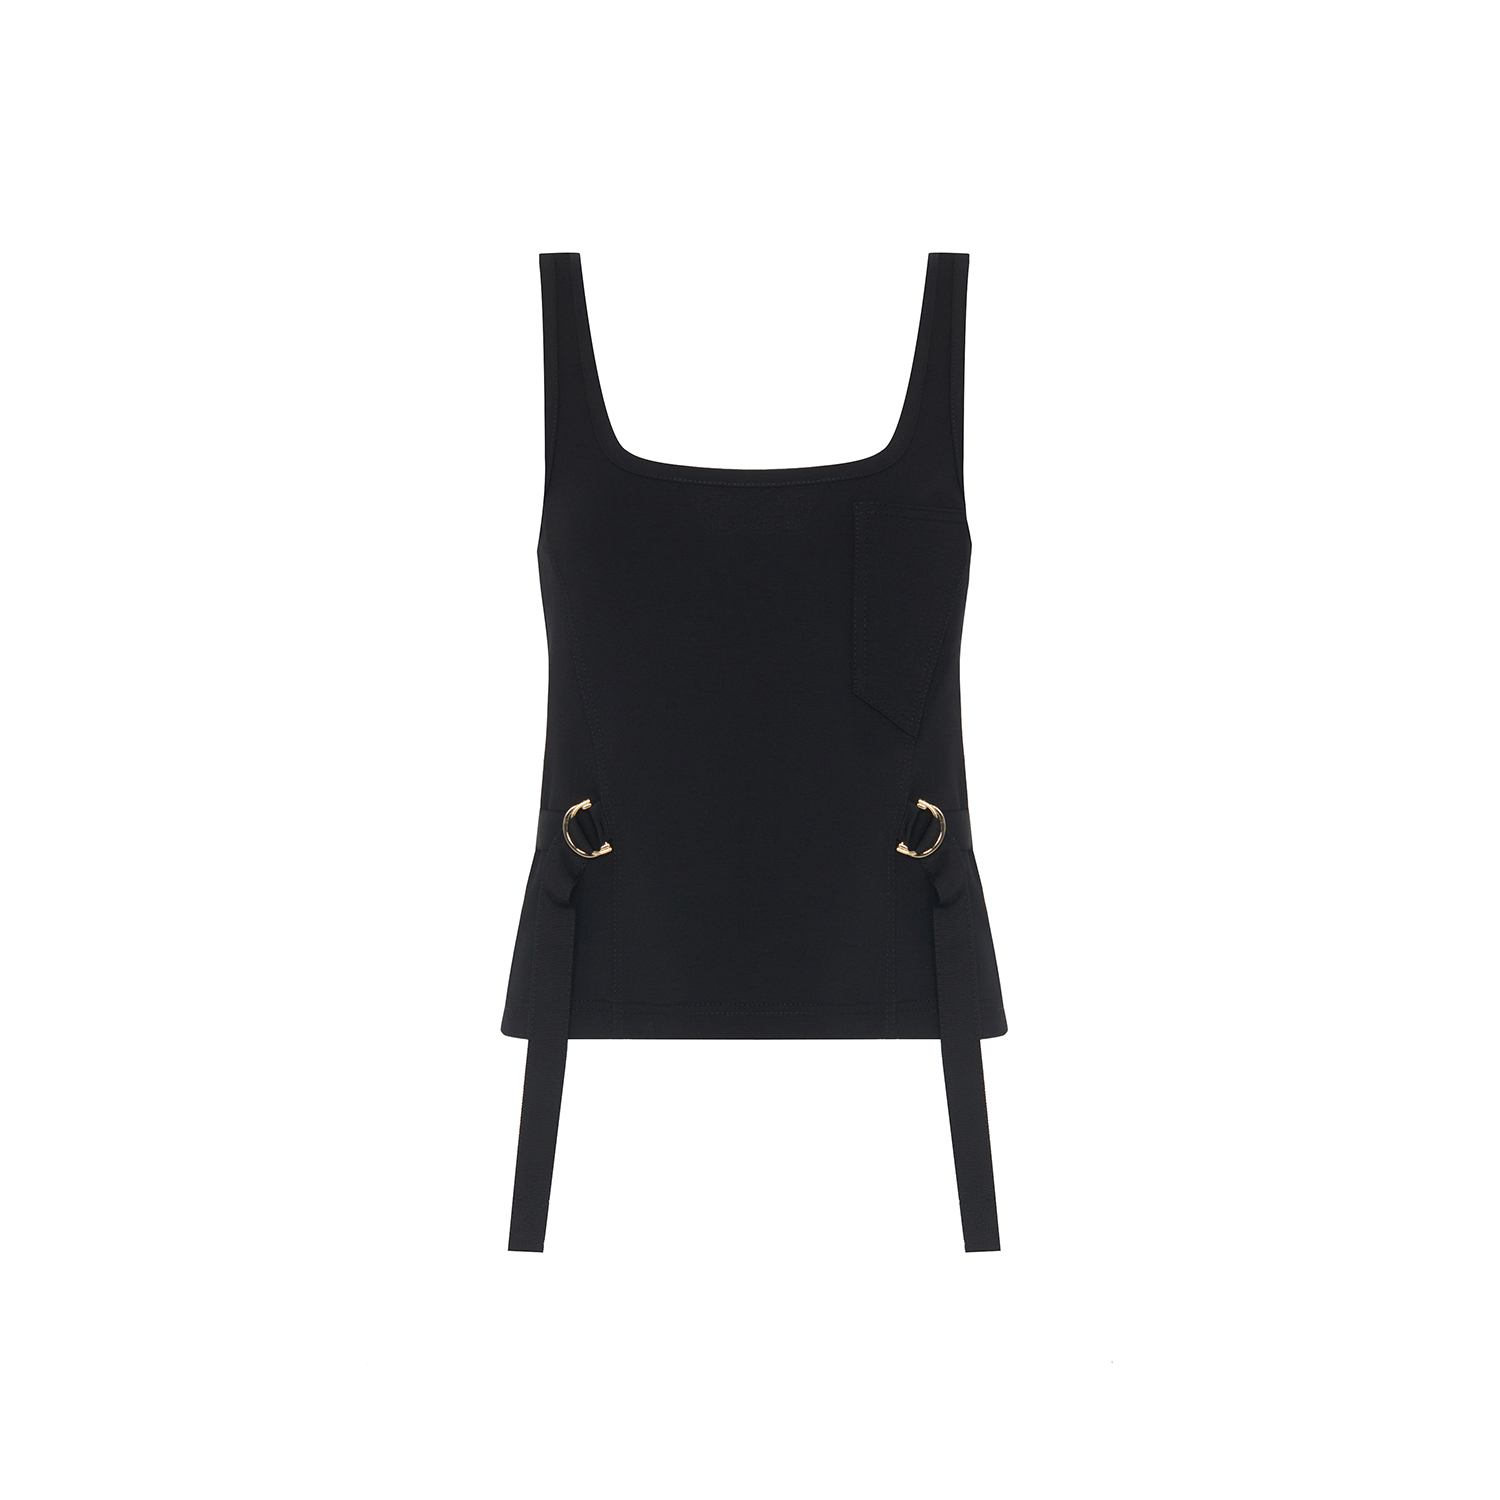 Women’s Side Buckle Strapped Black Top Extra Small Rue Les Createurs